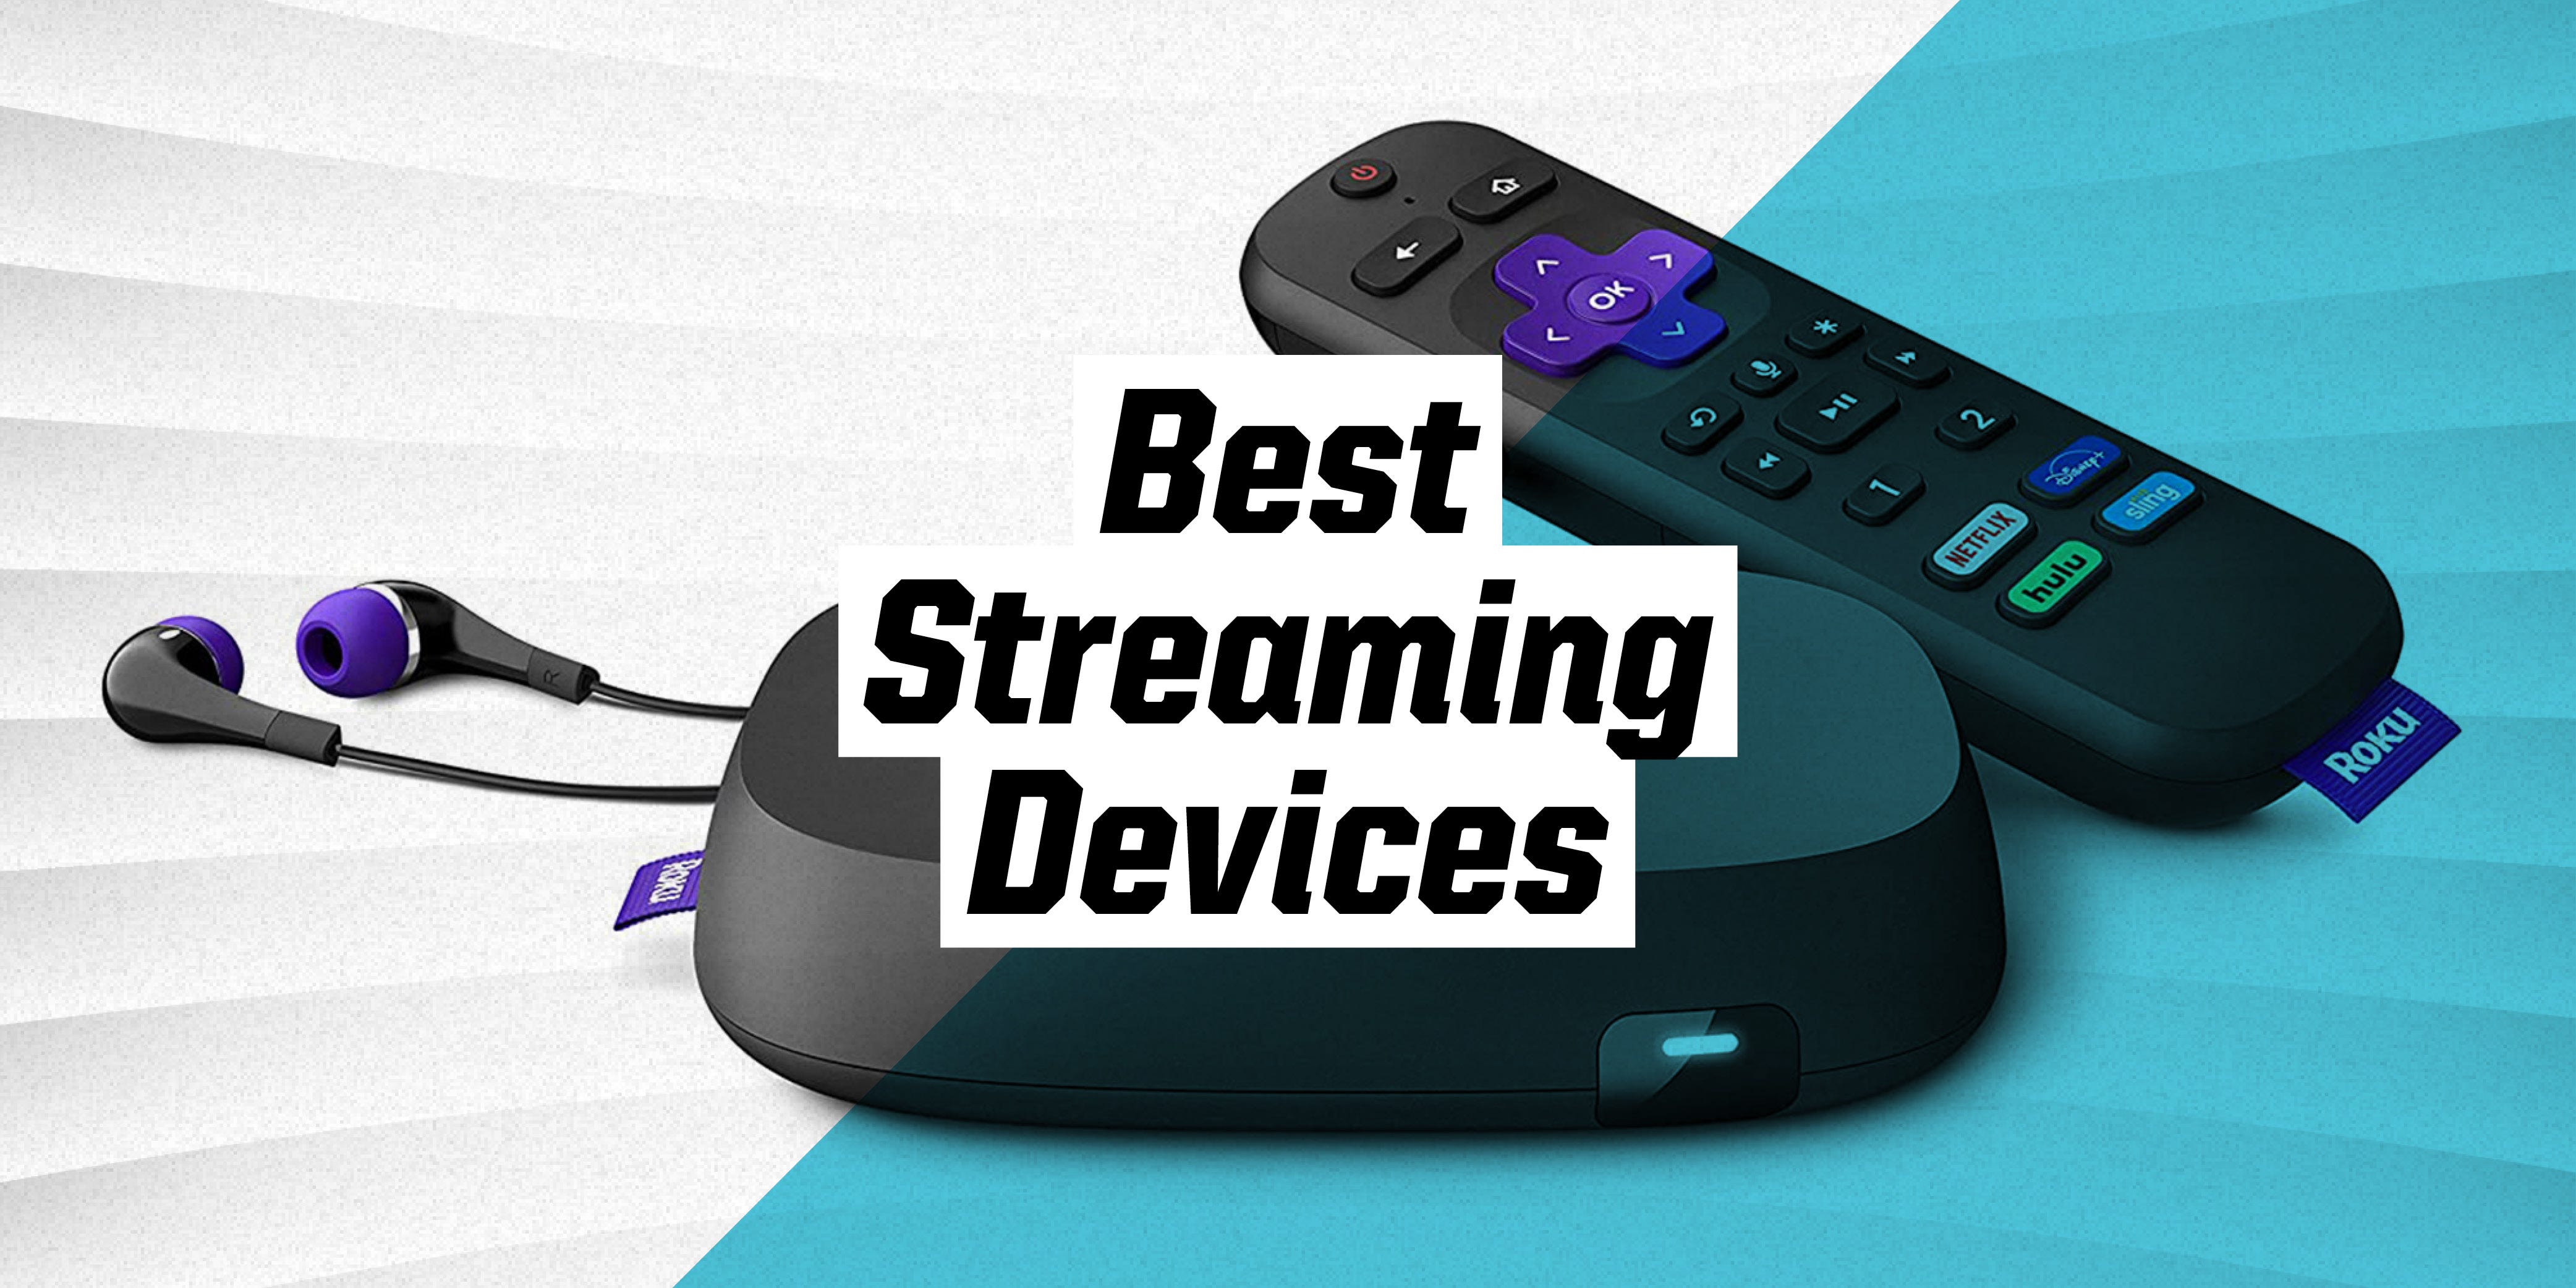 The Best Streaming Devices for Your Next Netflix Binge